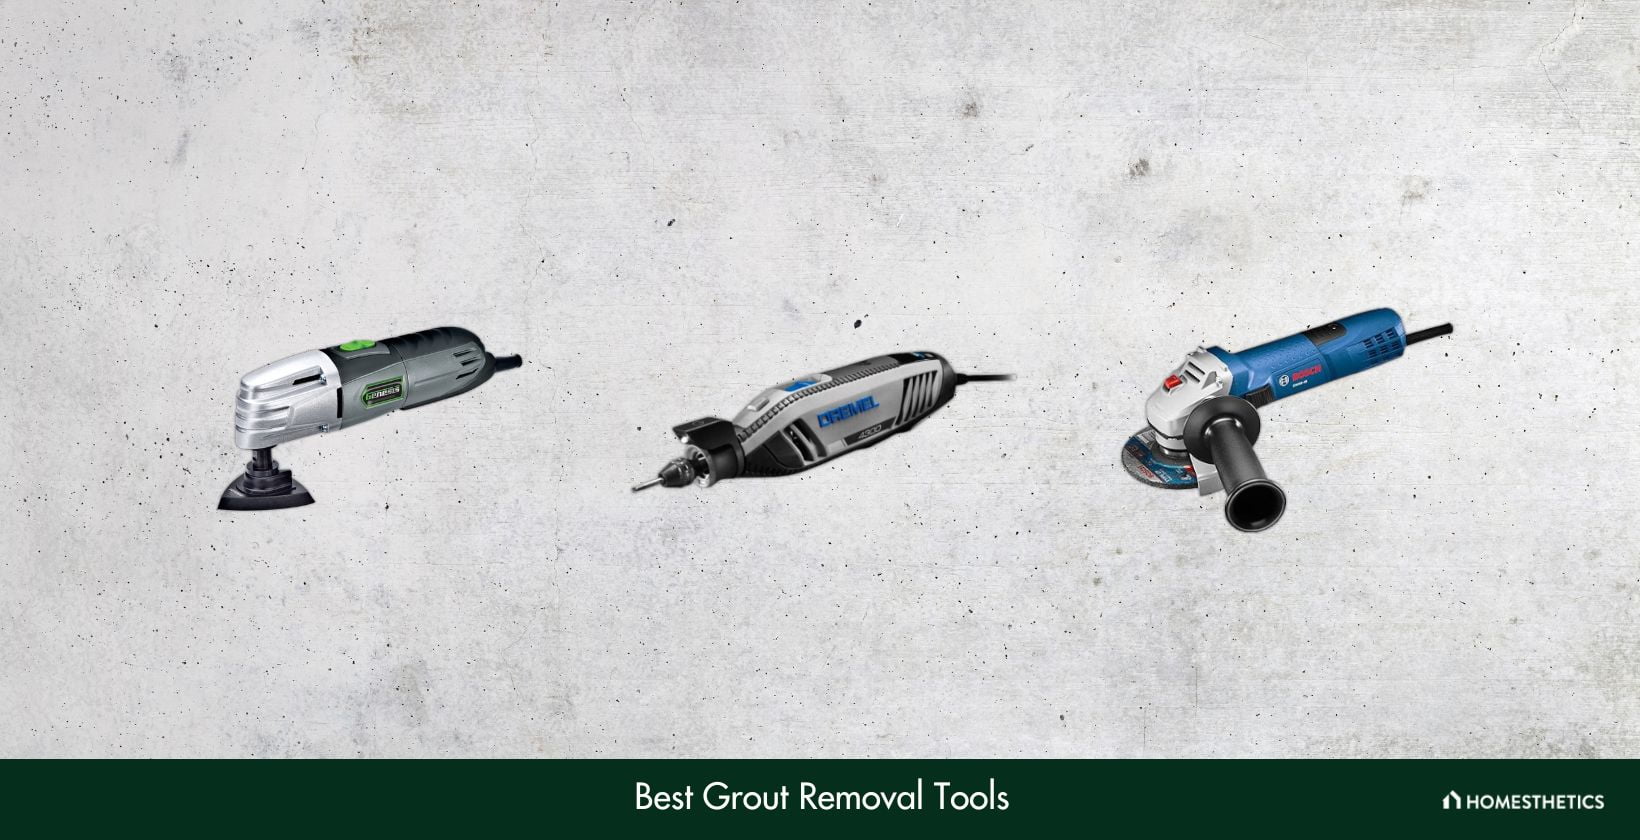 Grout Removal Tools, ** Best in 2023 **